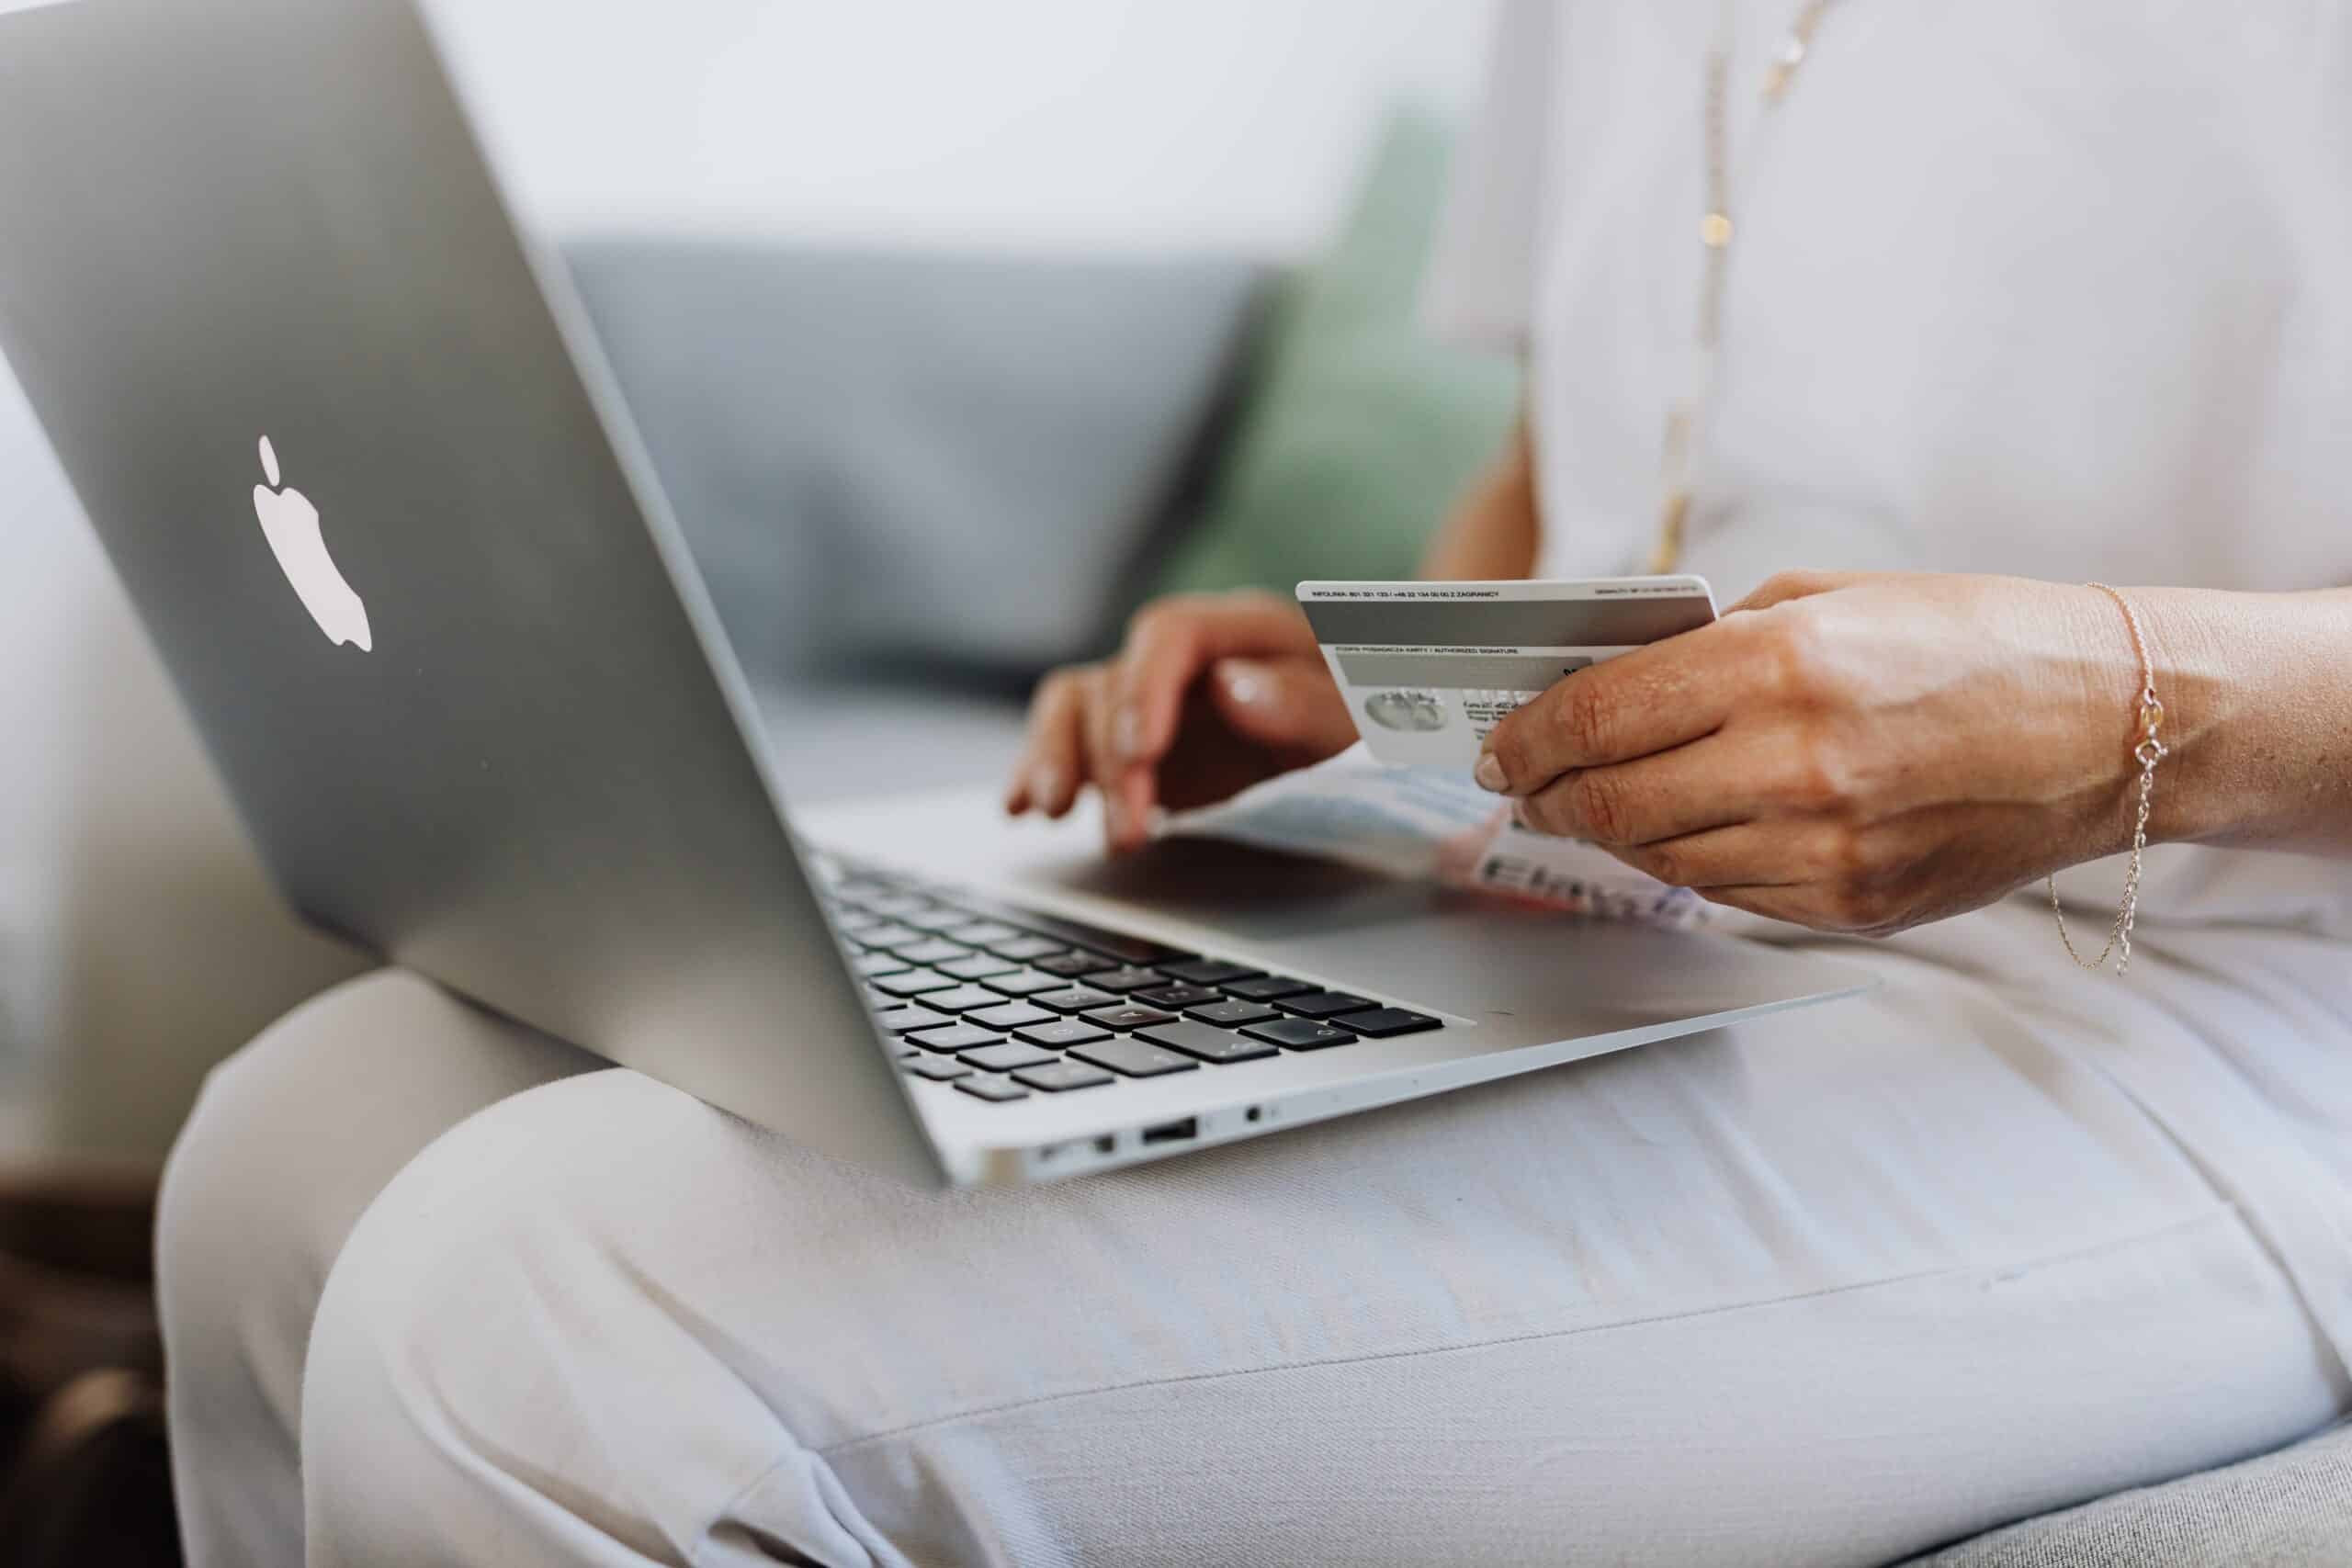 Woman sitting with her credit card out making an online purchase using her laptop.